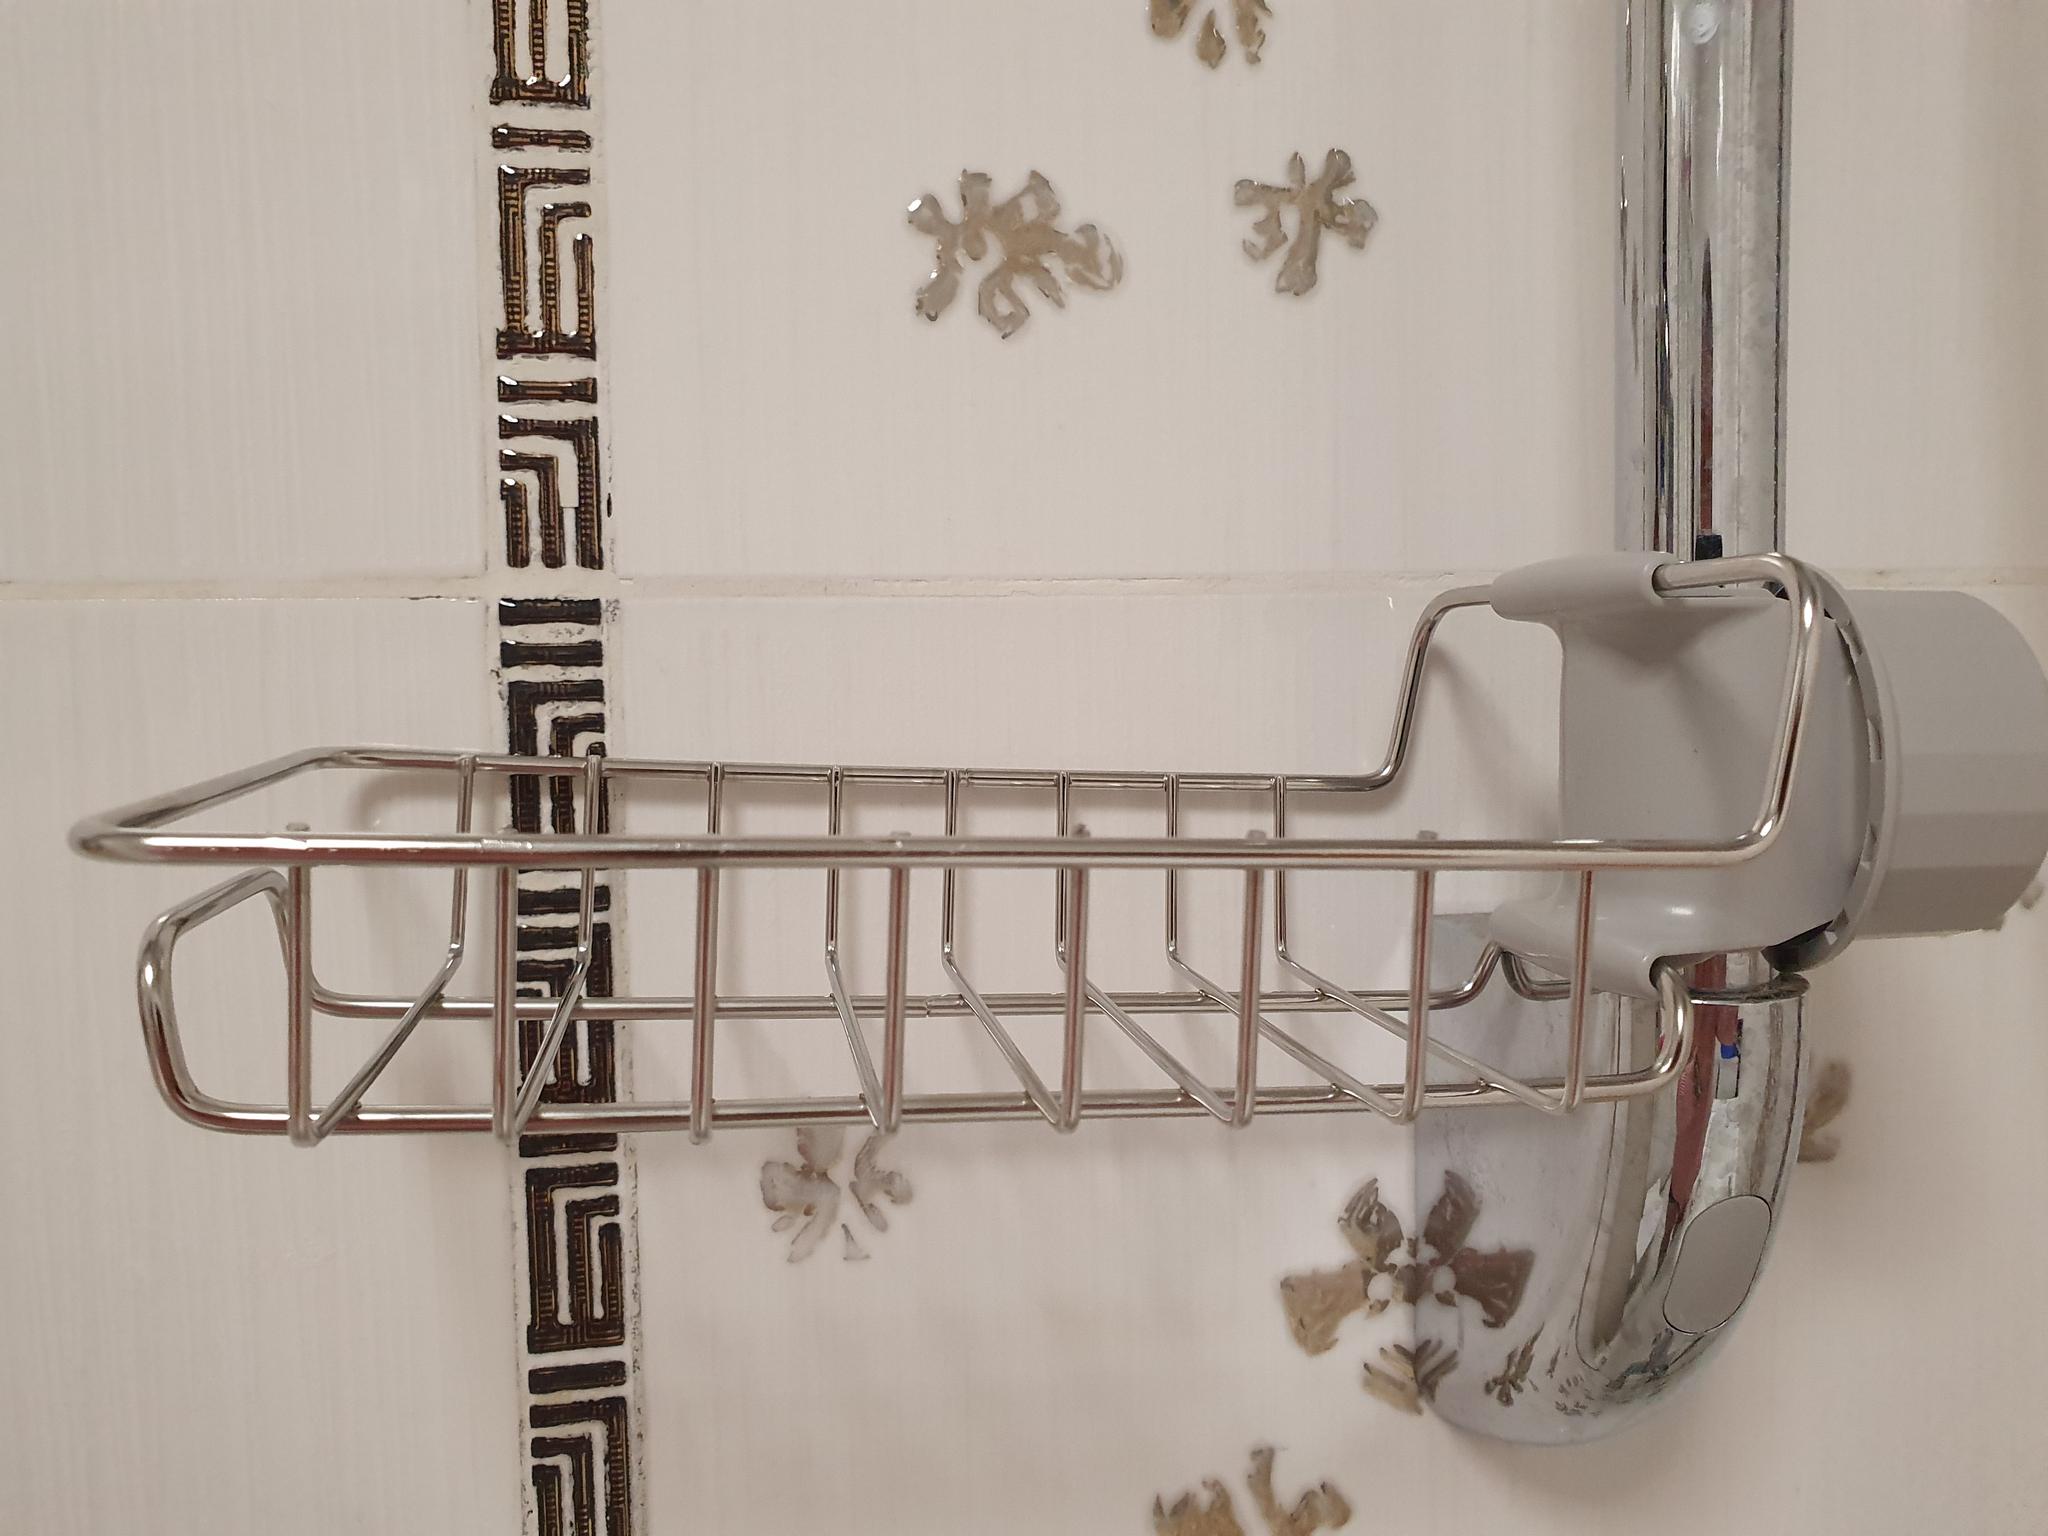 Stainless Steel Drain Rack For Kitchen Faucet Rack photo review